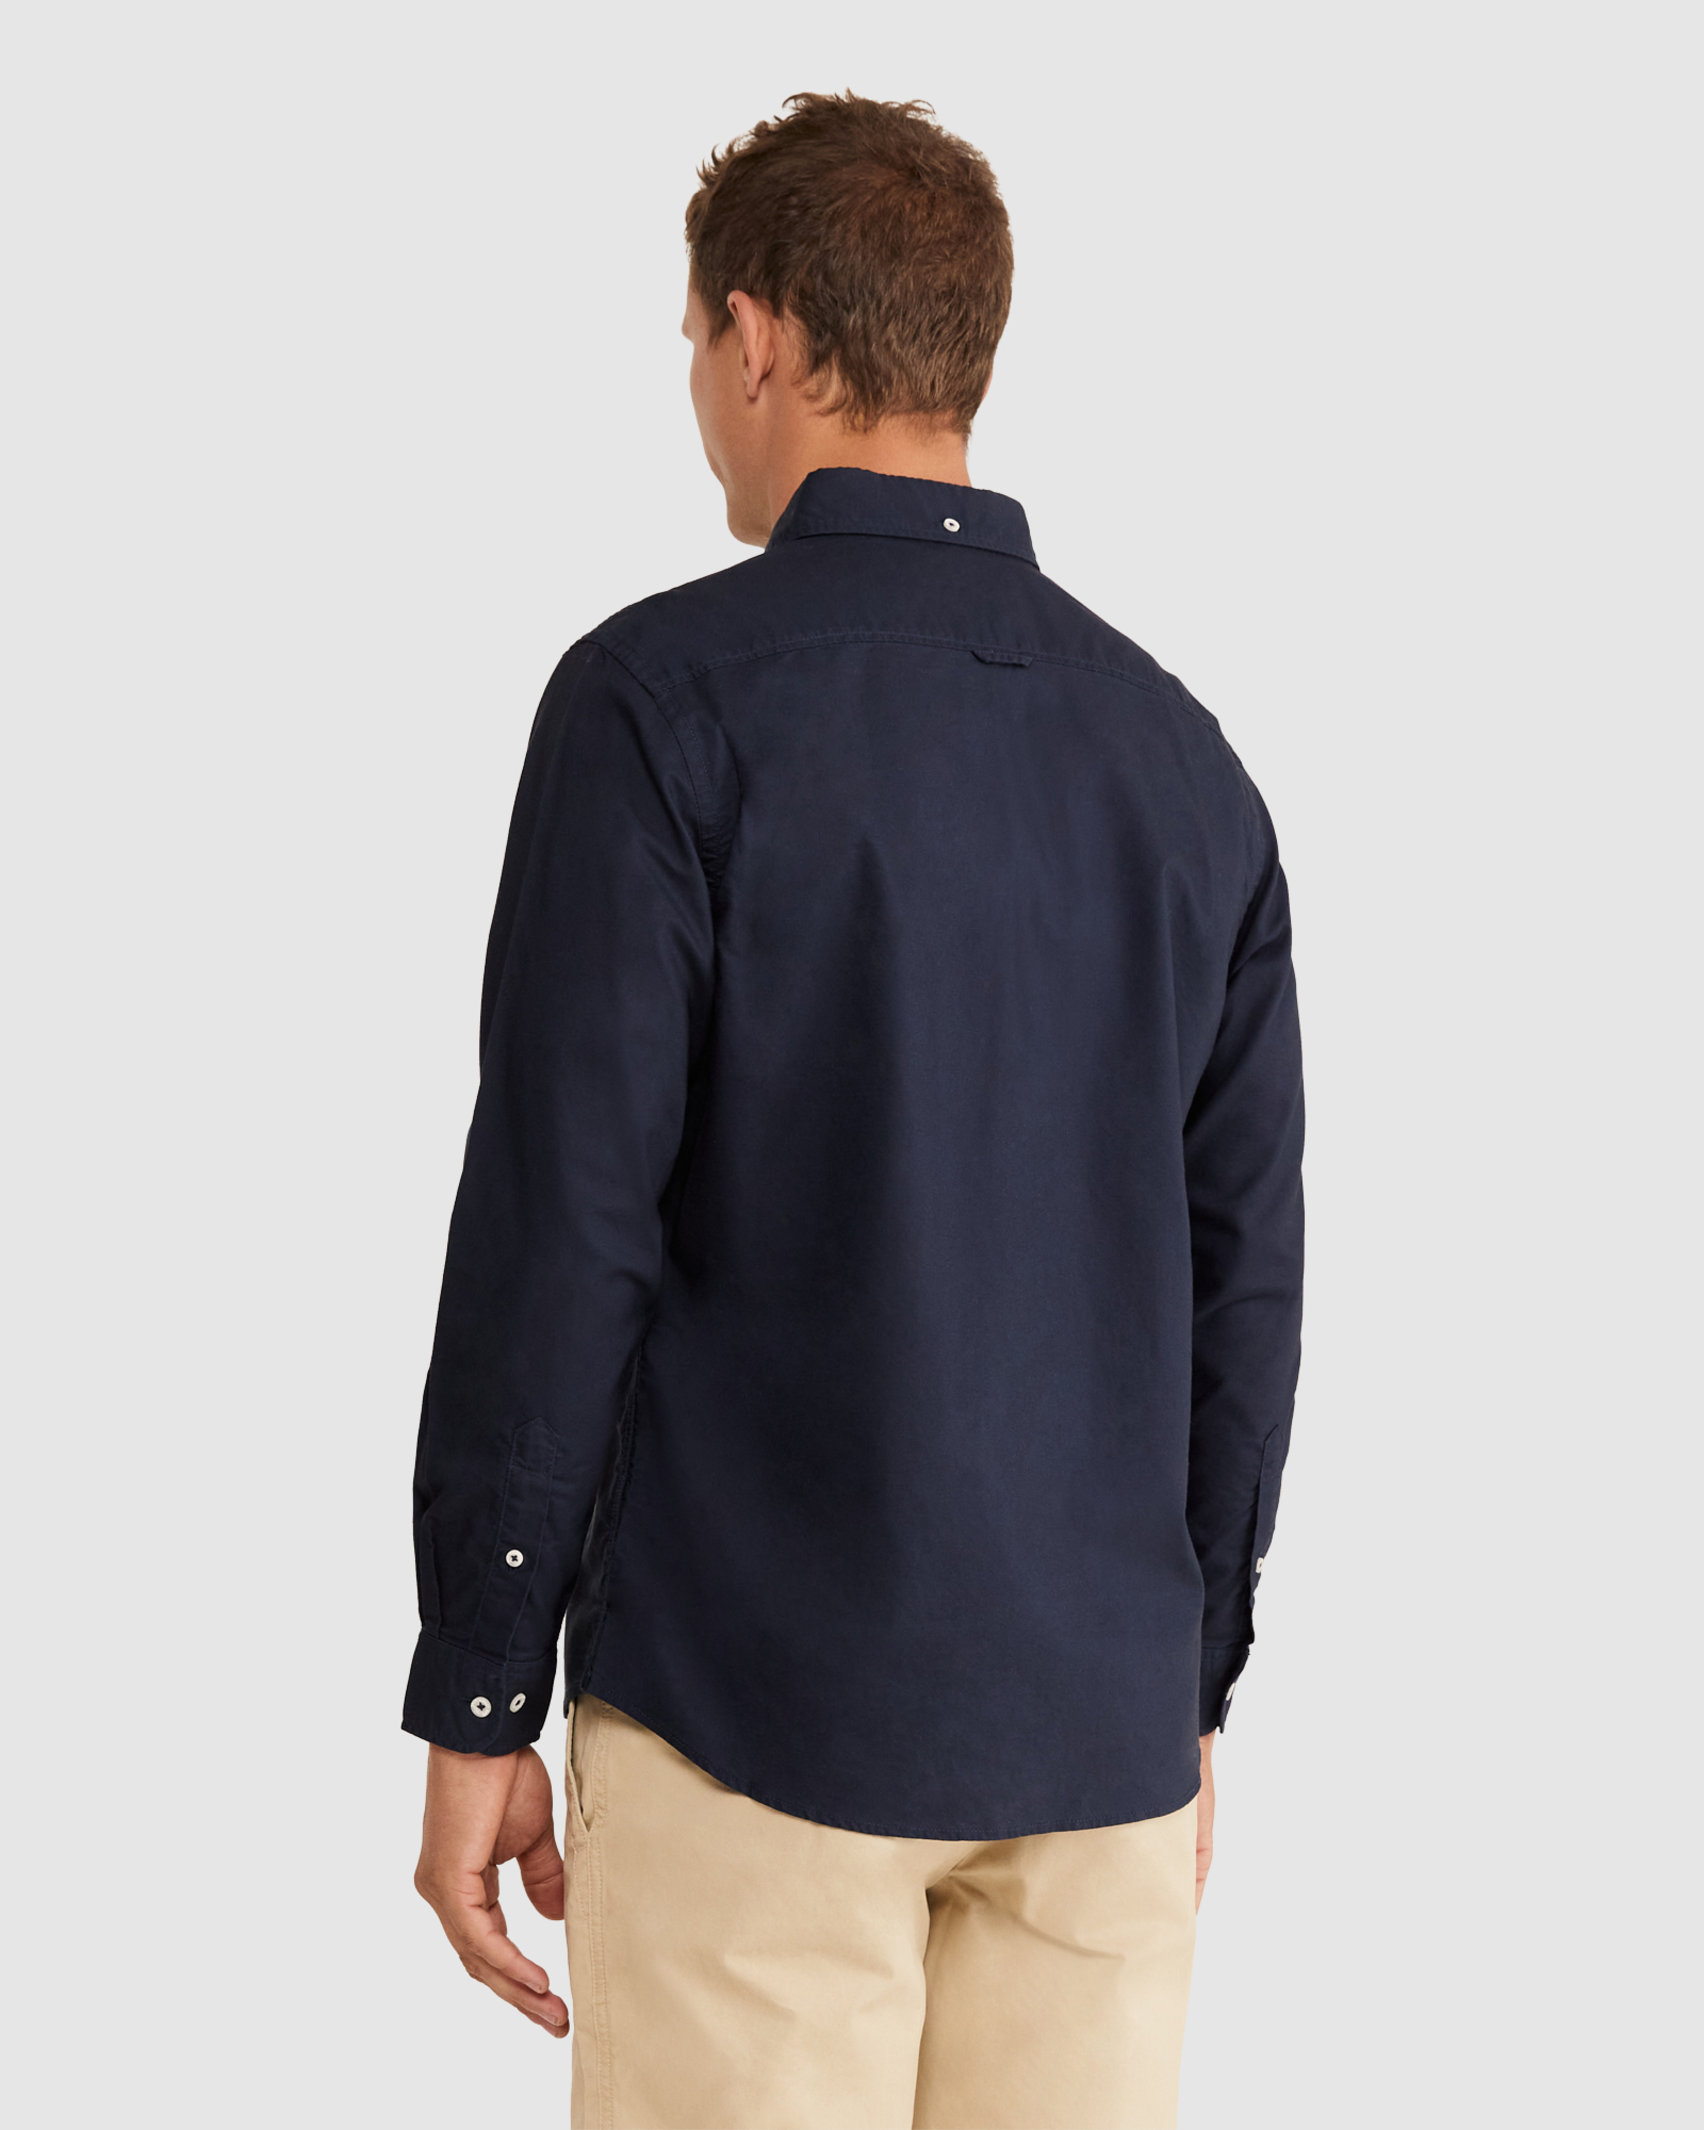 Oxford Long Sleeve Shirt in NAVY